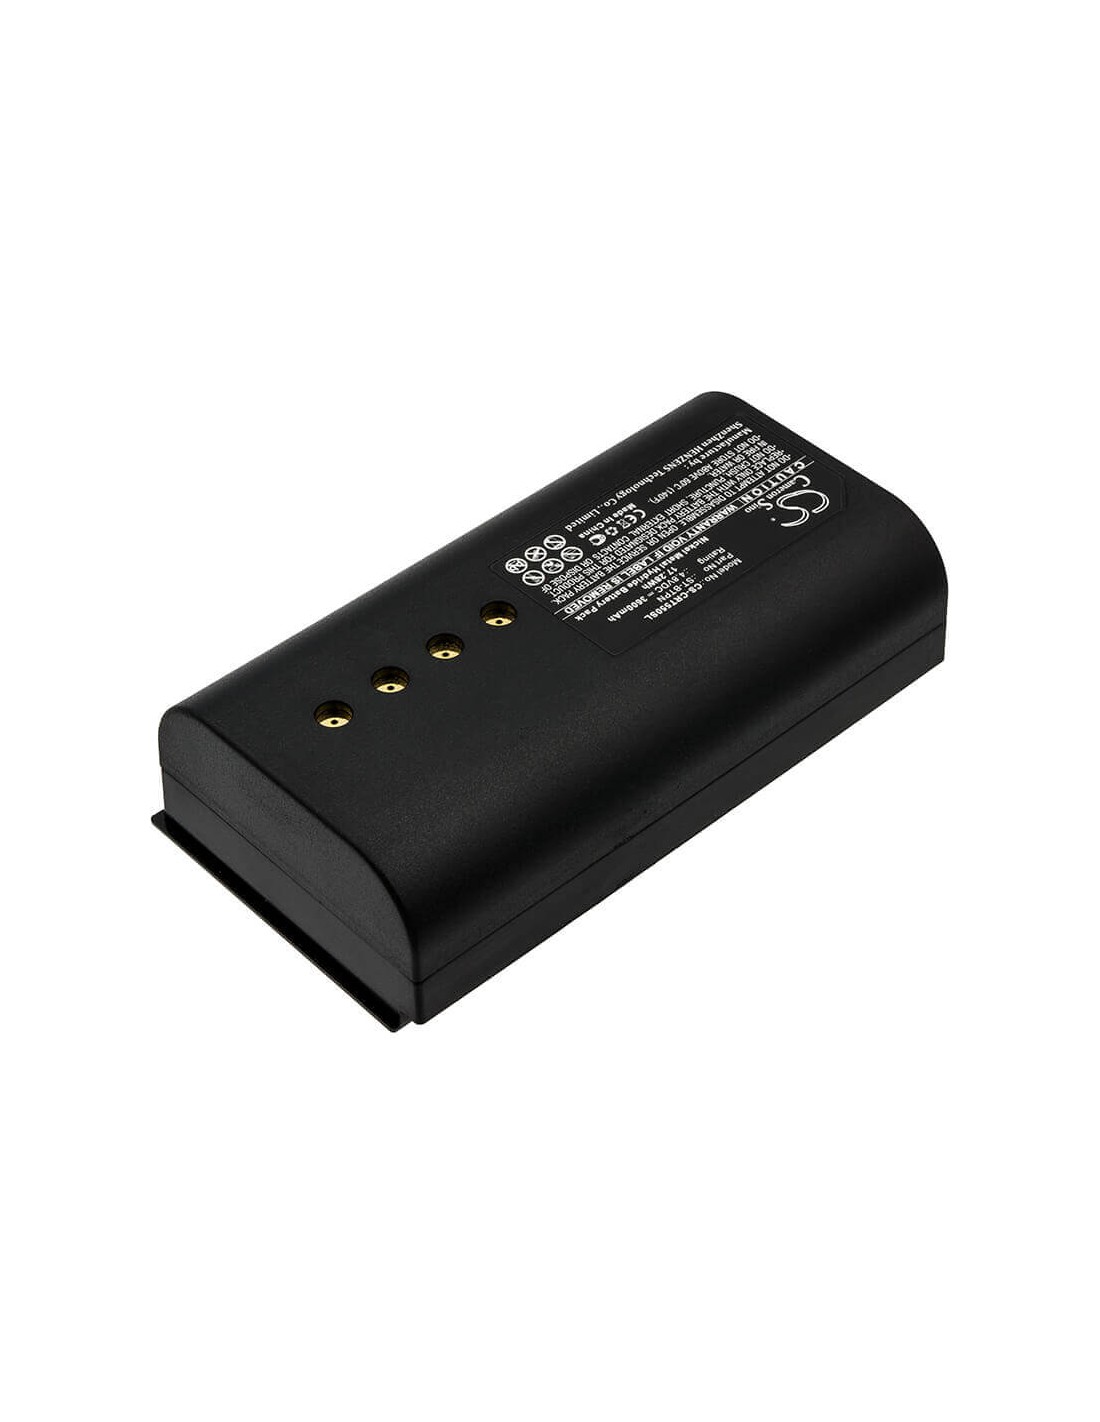 Battery for Crestron Smartouch 1550, Smartouch 1700, St-1700 4.8V, 3600mAh - 17.28Wh